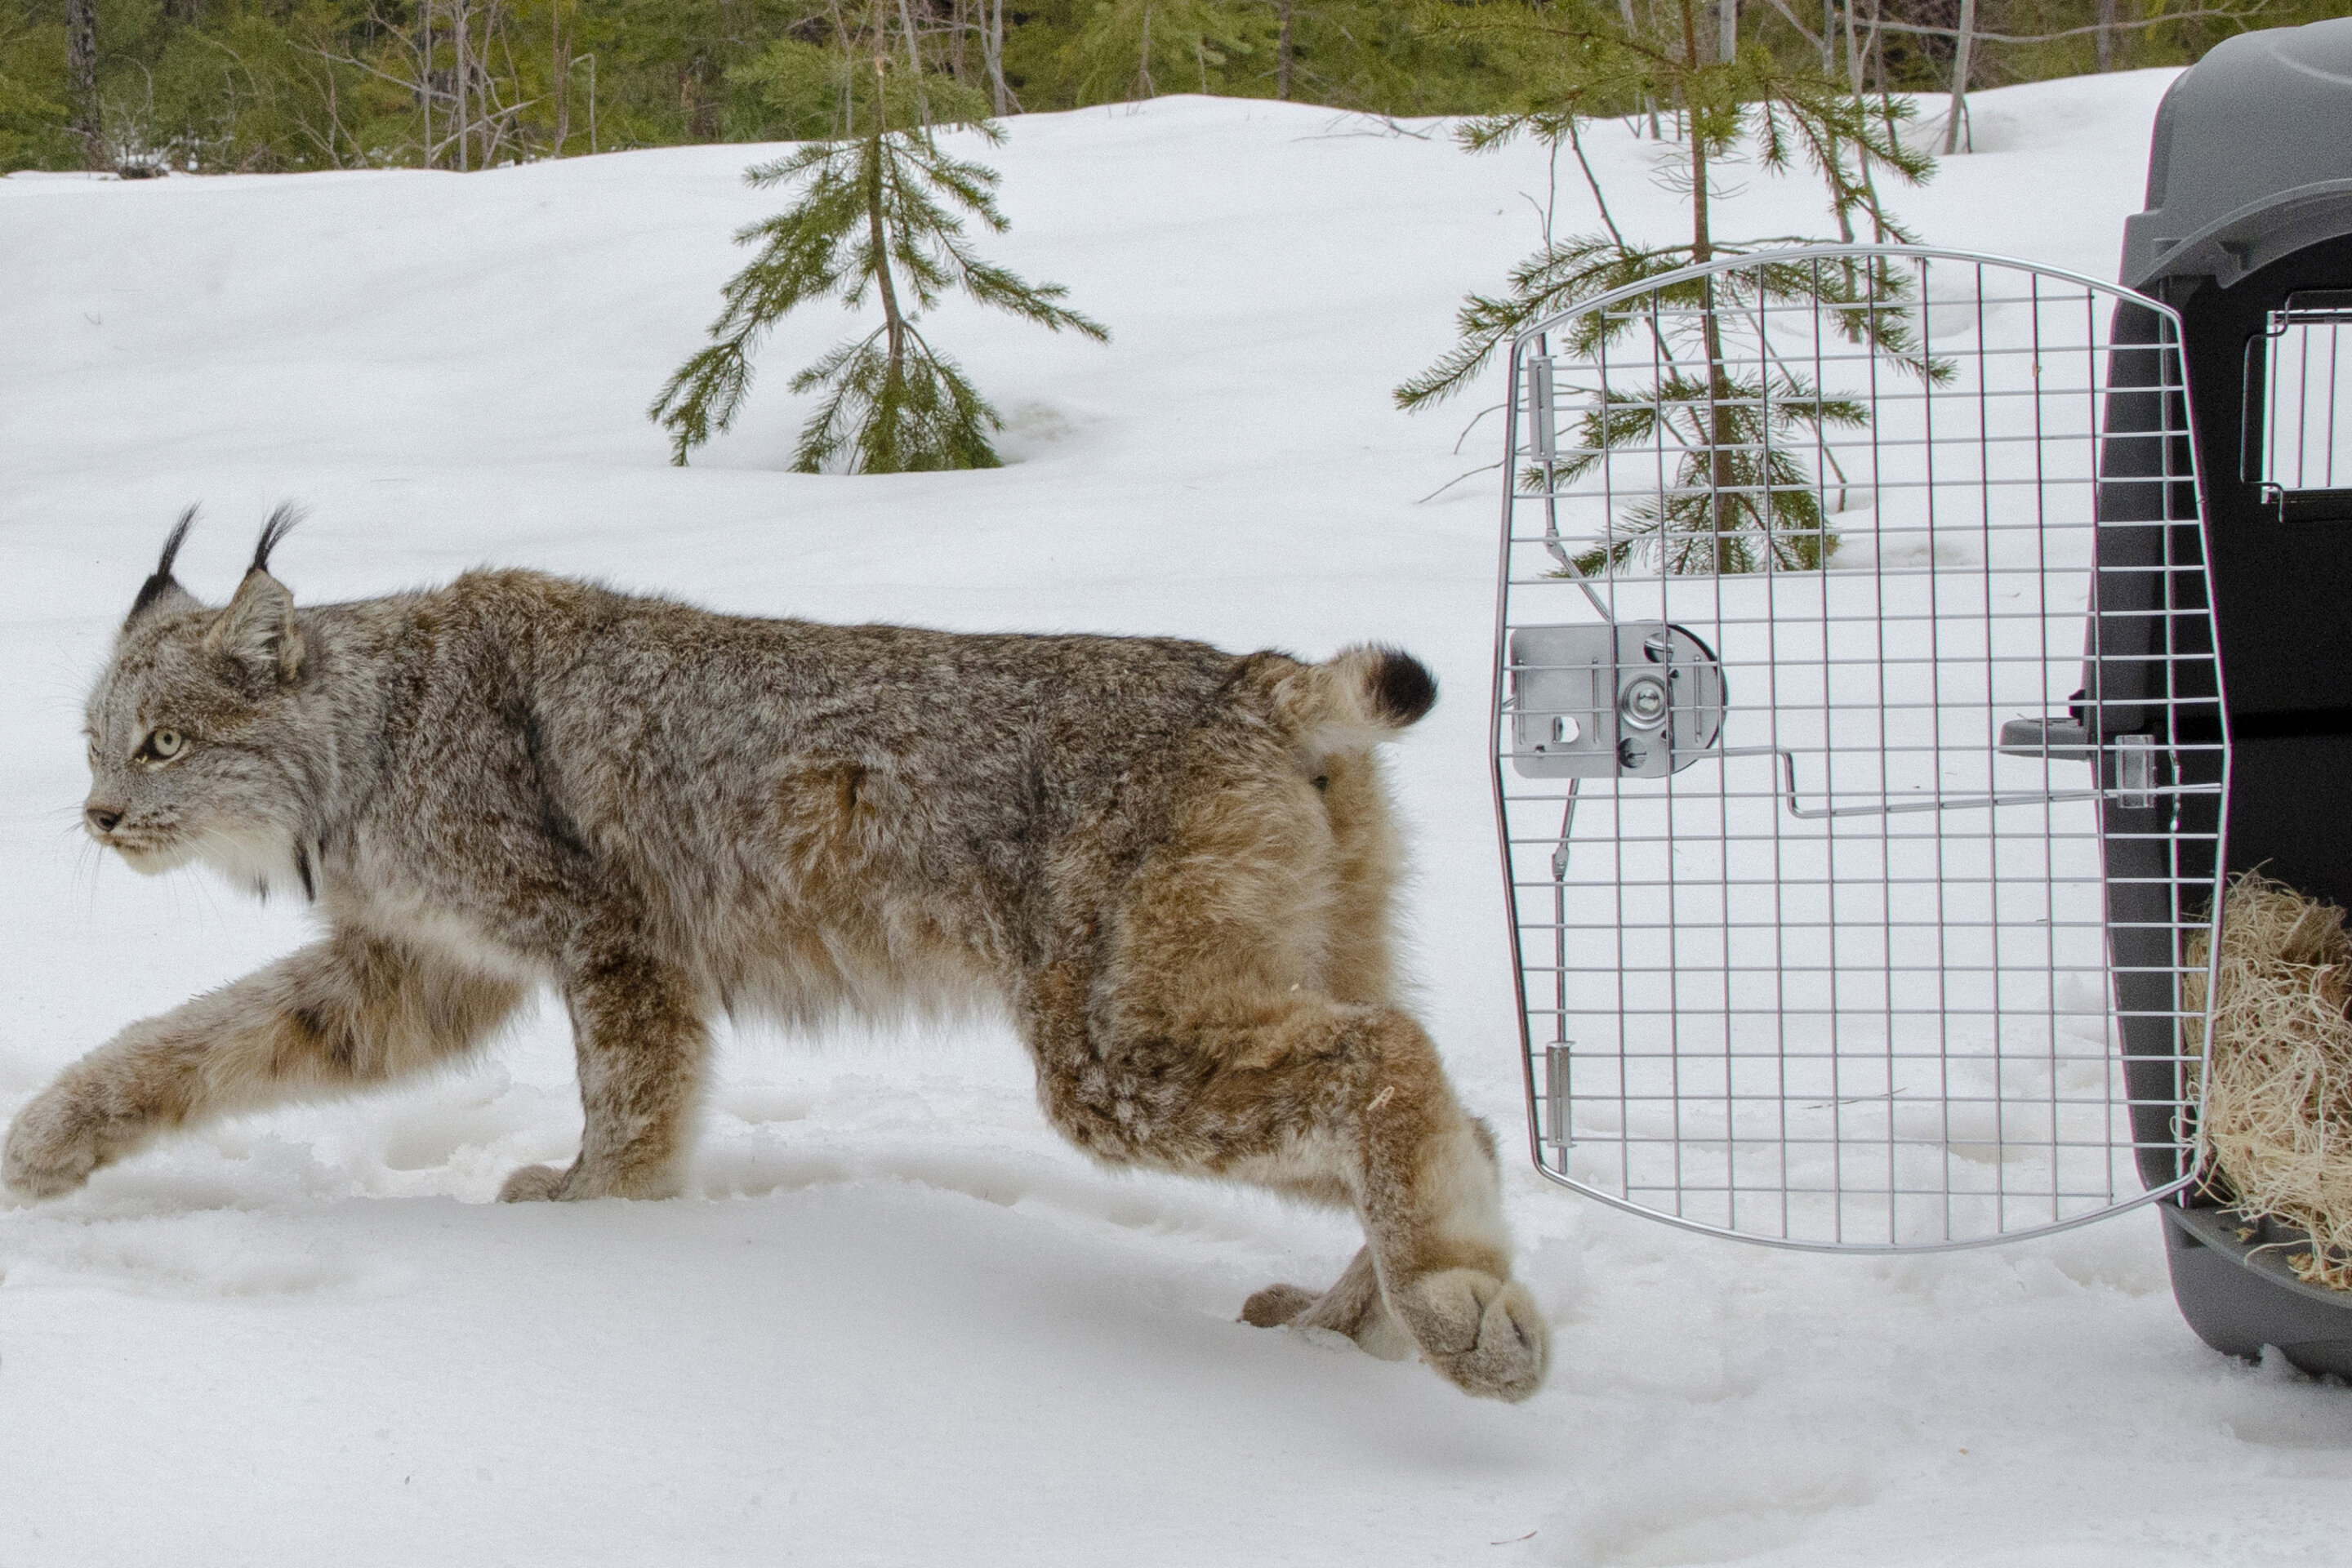 #Canada lynx protections deal sealed by US, environmentalists